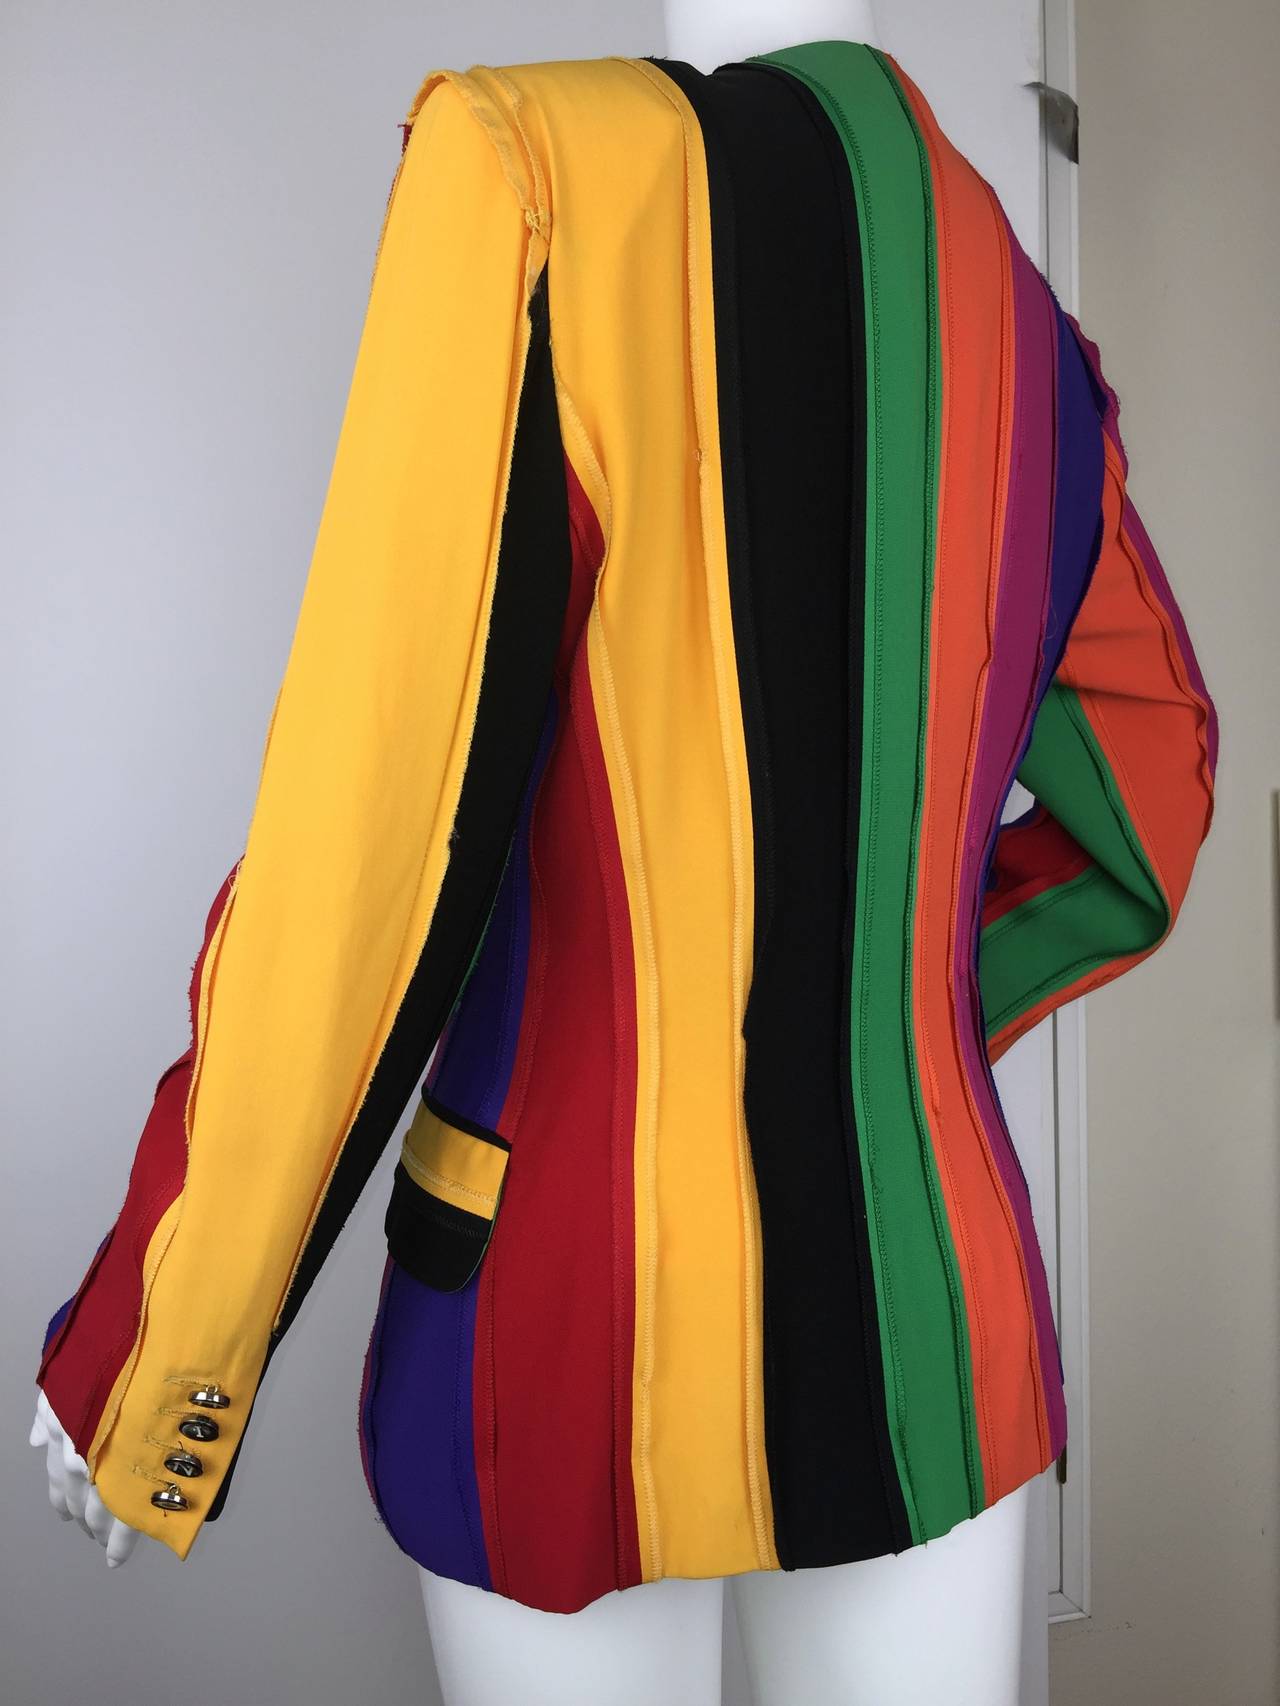 Vintage rainbow color block jacket designed by Franco Moschino. 

The playfulness and wit of his iconic 90's designs are fully on display here.  

Retro typewriter keys spell out the brand both down the front and when combined on both sleeves.